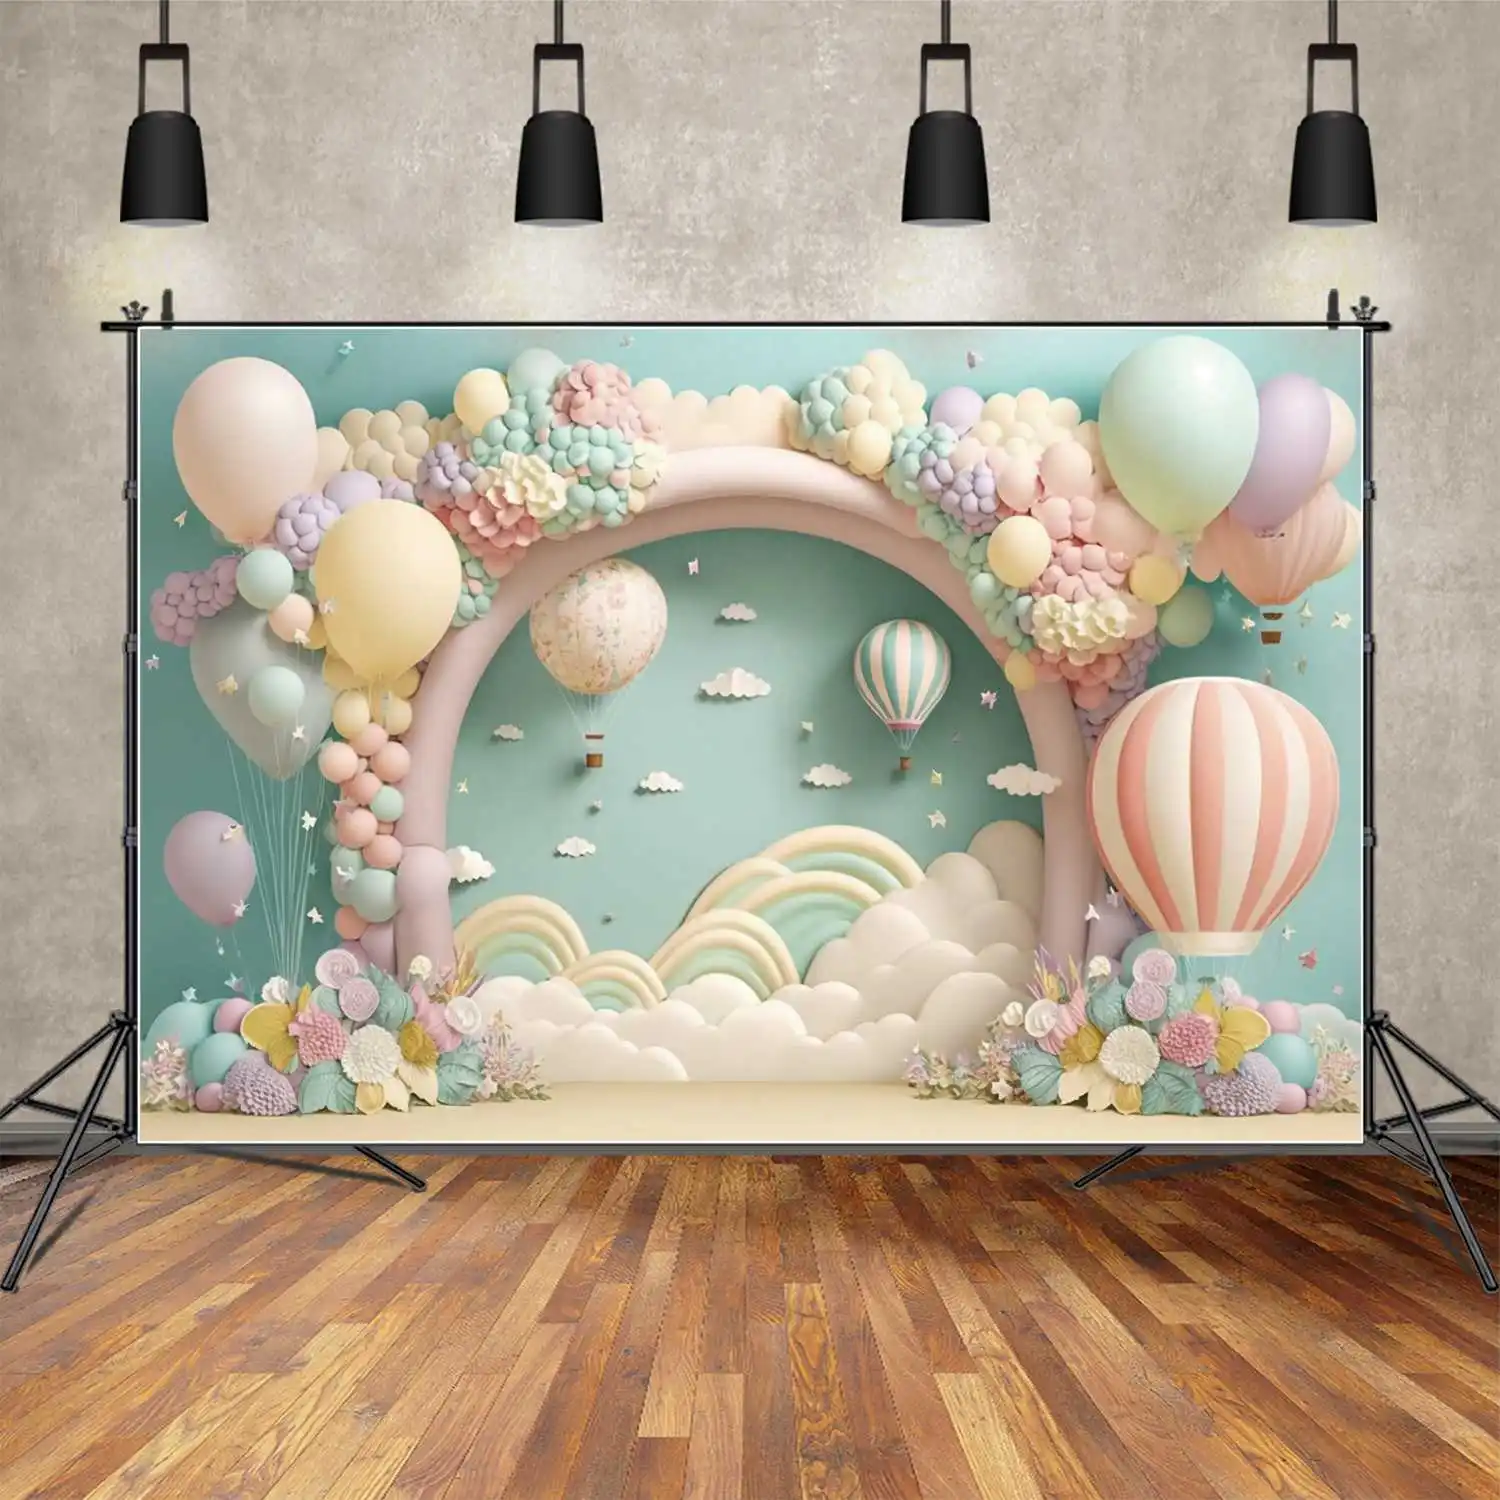 

MOON.QG Backdrop Birthday Arch Door Decoration Floral Flower Balloon Frame Blue Cloud Wall Background Custom Banner Photo Booth